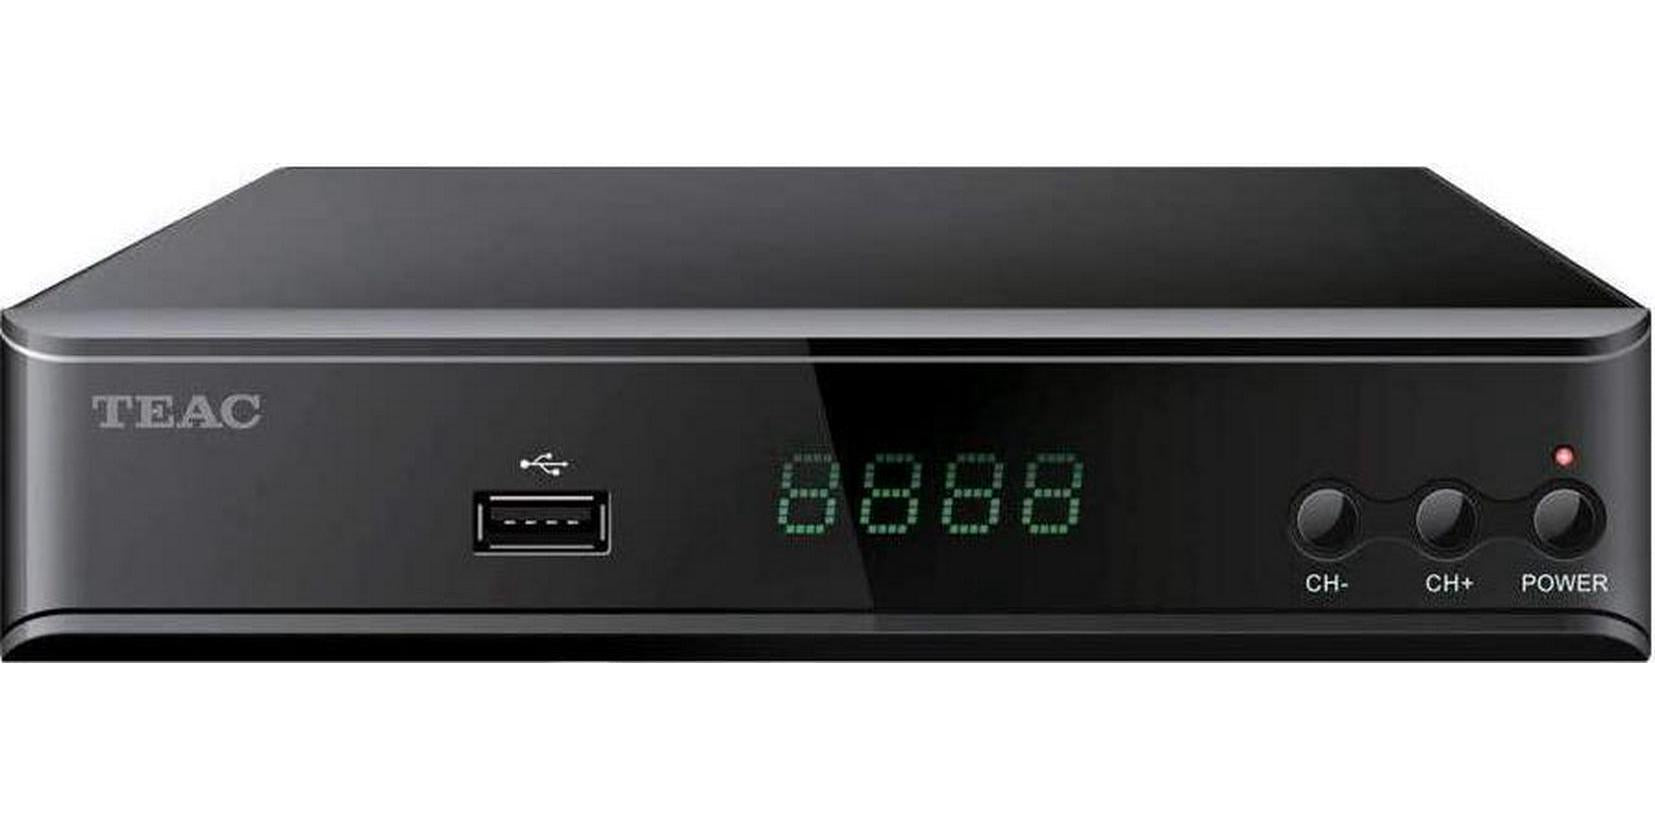 TEAC, TEAC HDB860 - Full HD Set TOP Box with USB Recording | Record Live TV via EPG or Timer| USB Multimedia Playback|HDMI|Video Out|Remote